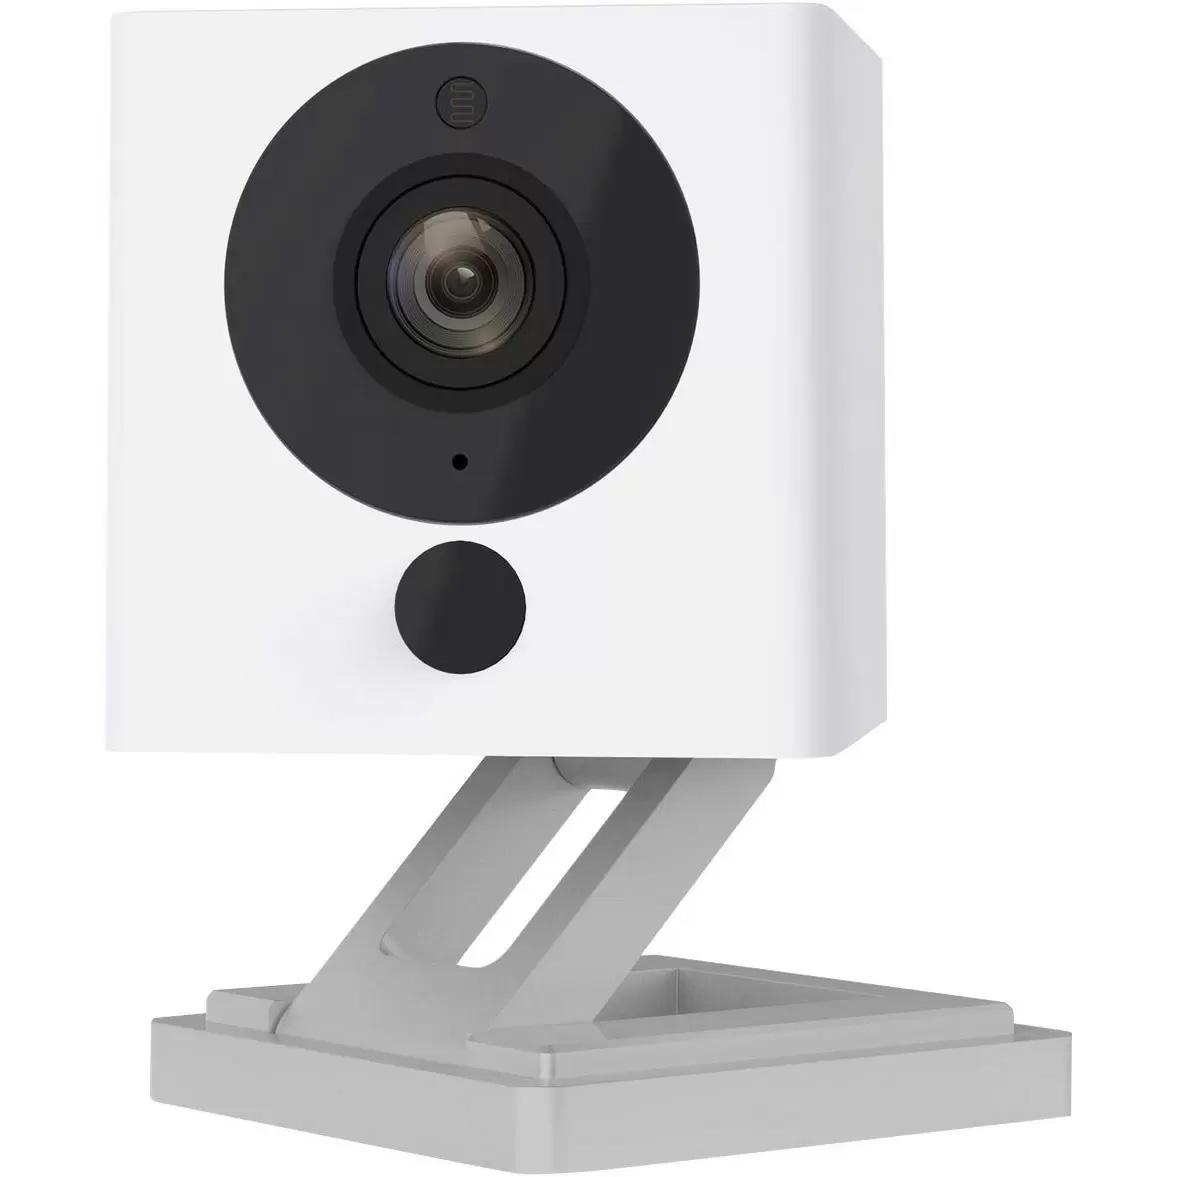 Wyze Labs 1080p Indoor Wireless Camera for $20.78